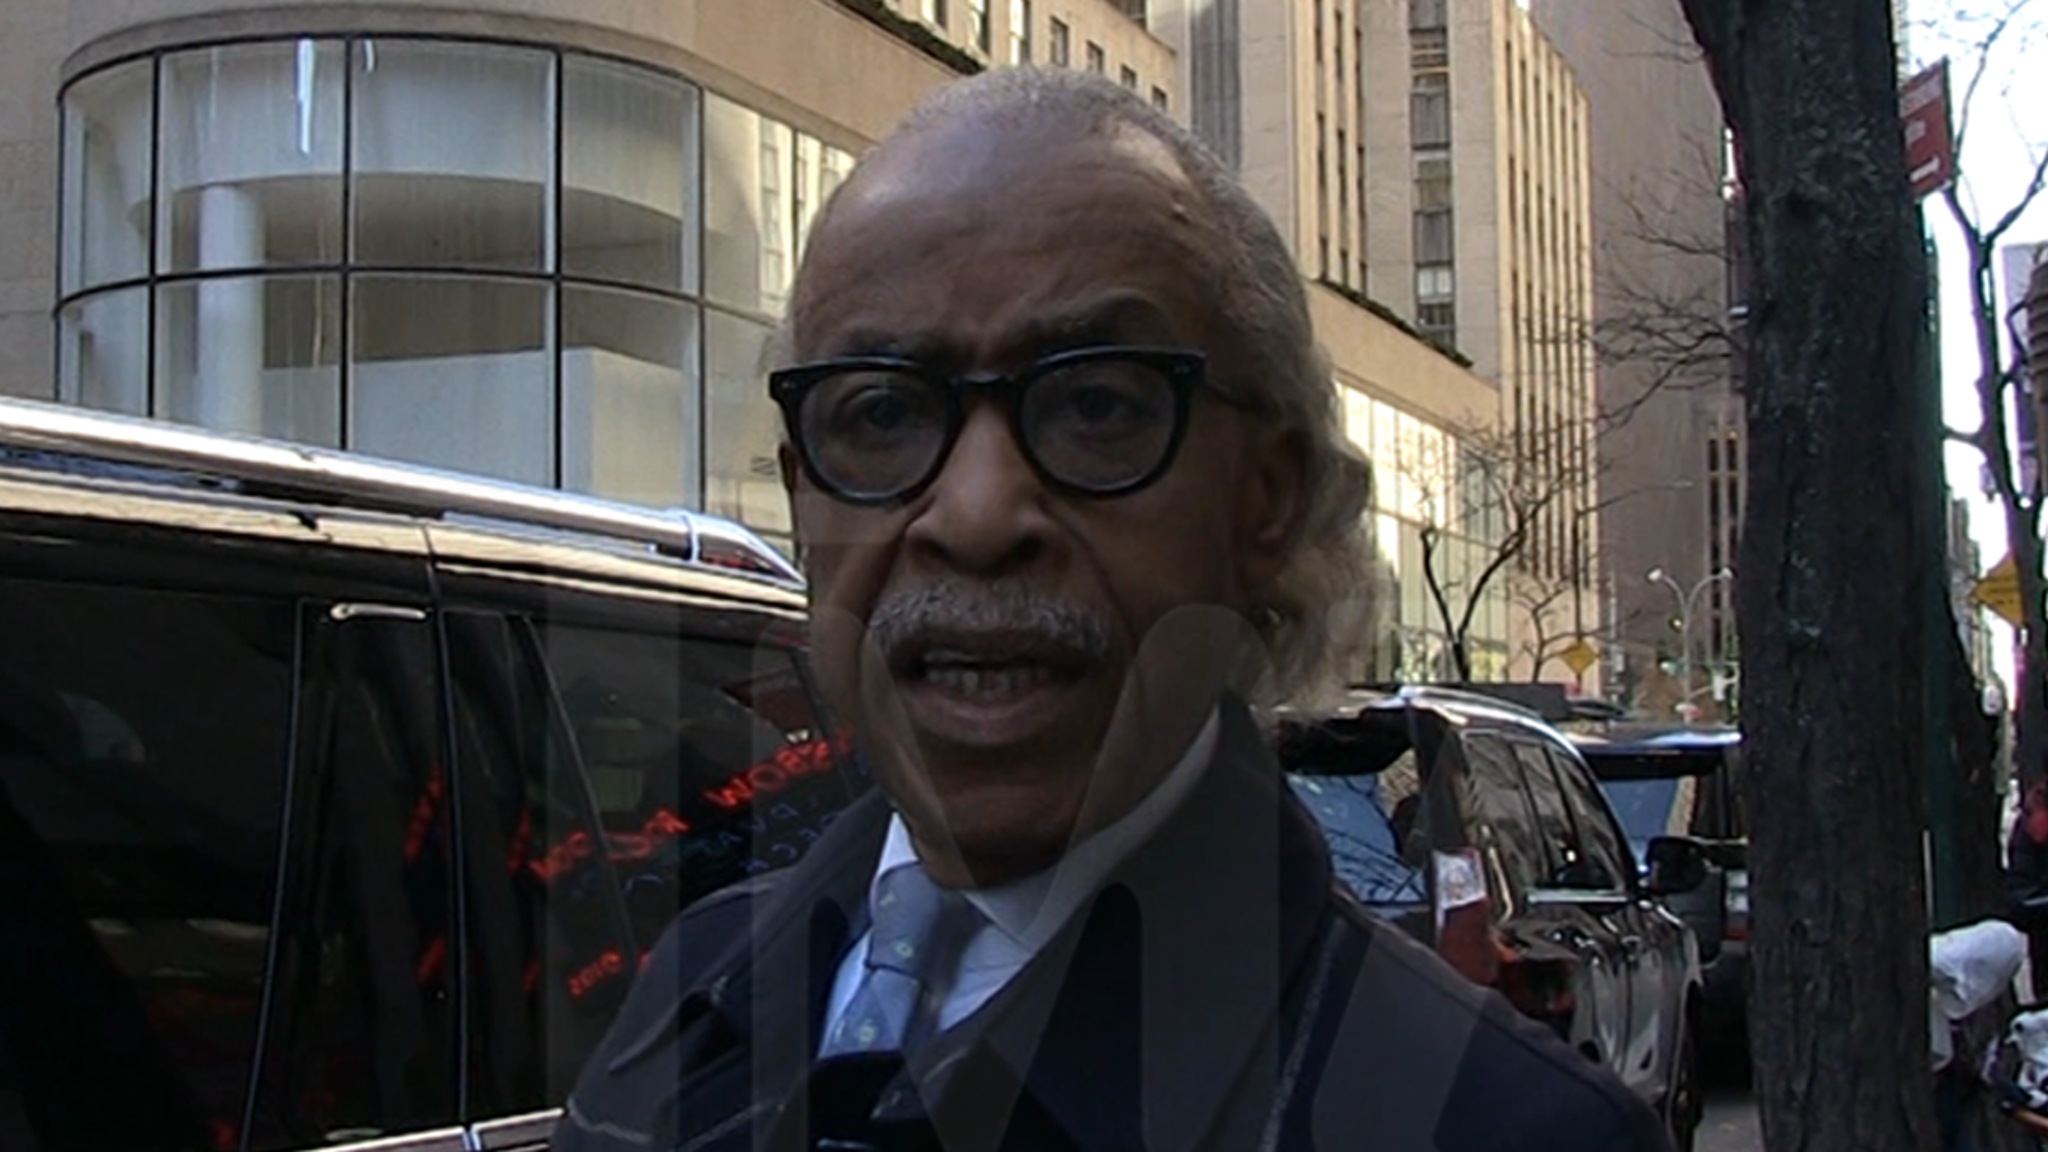 Al Sharpton Says Kyrie Irving Doesn't Get 'Flogging' For Anti-Semitism